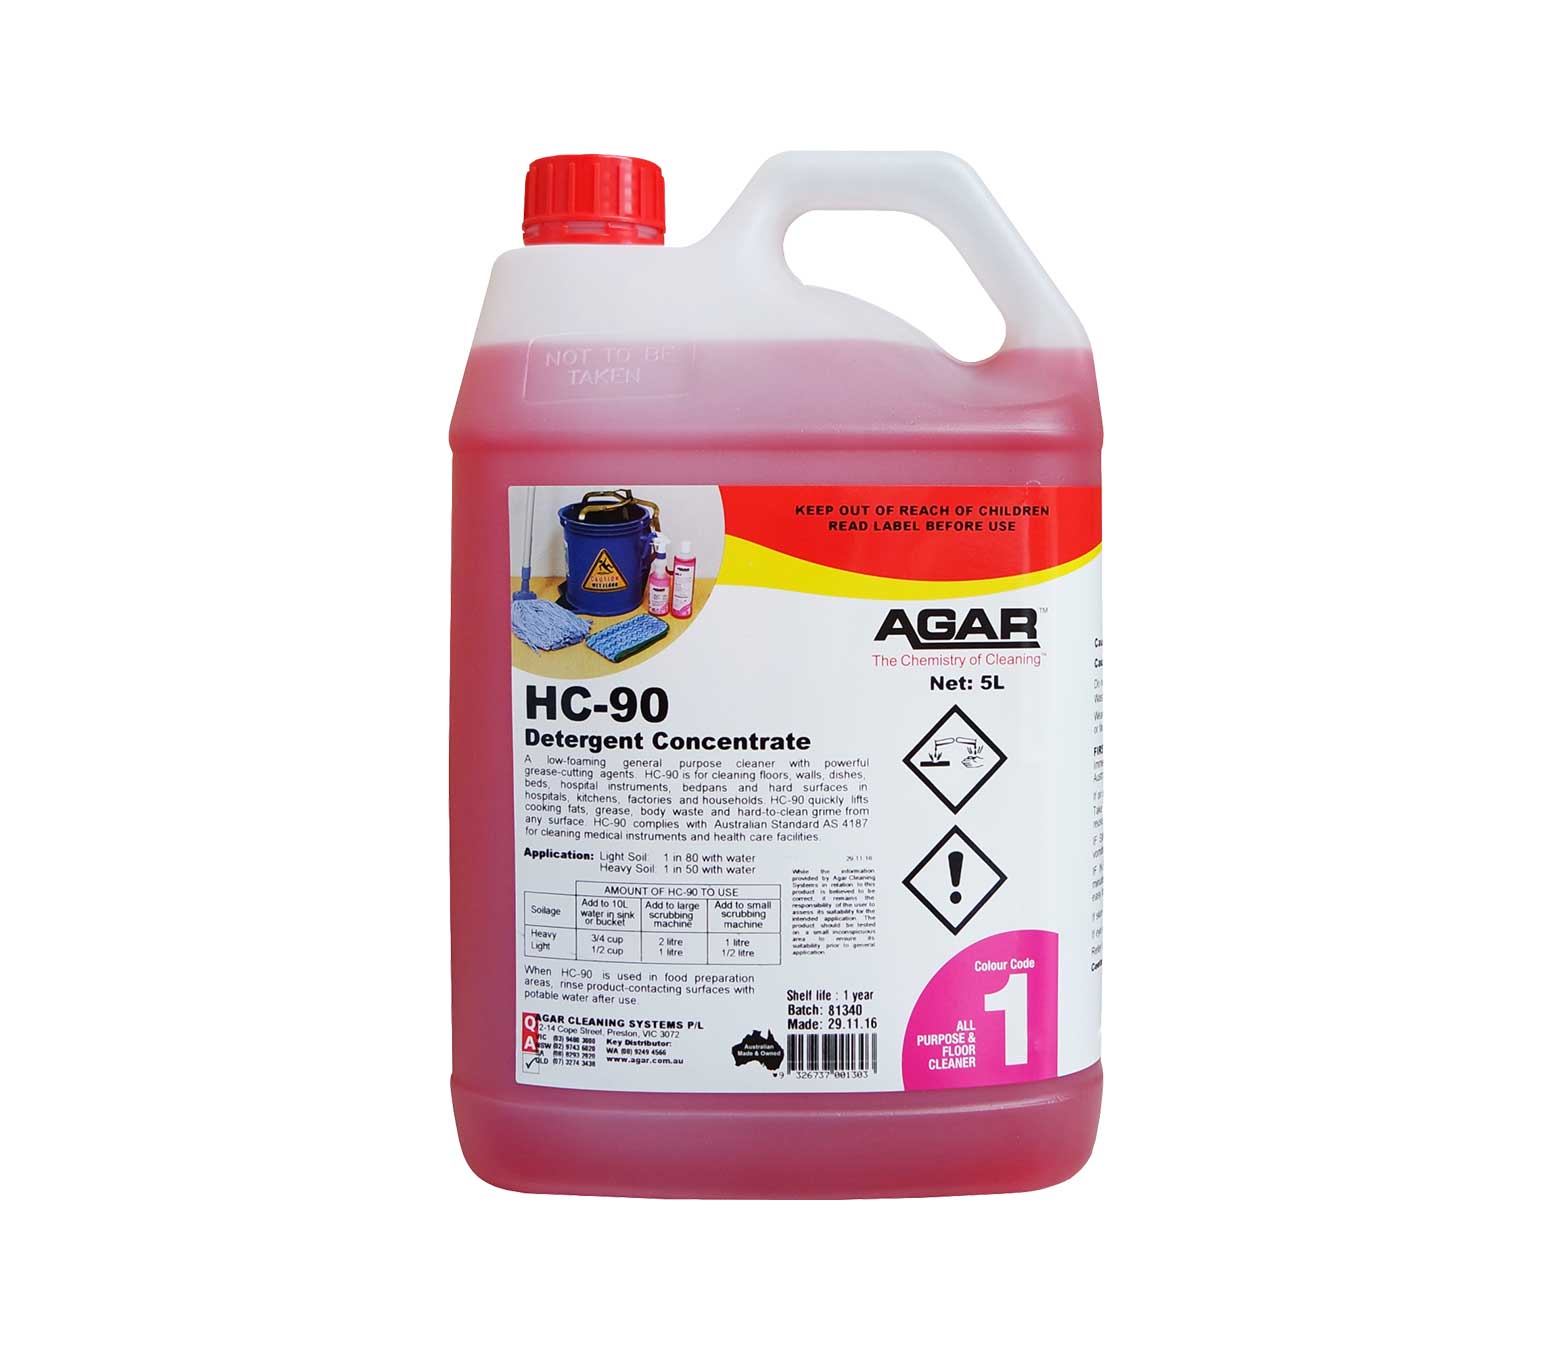 HC-90 - Biodegradable Concentrated Detergent.